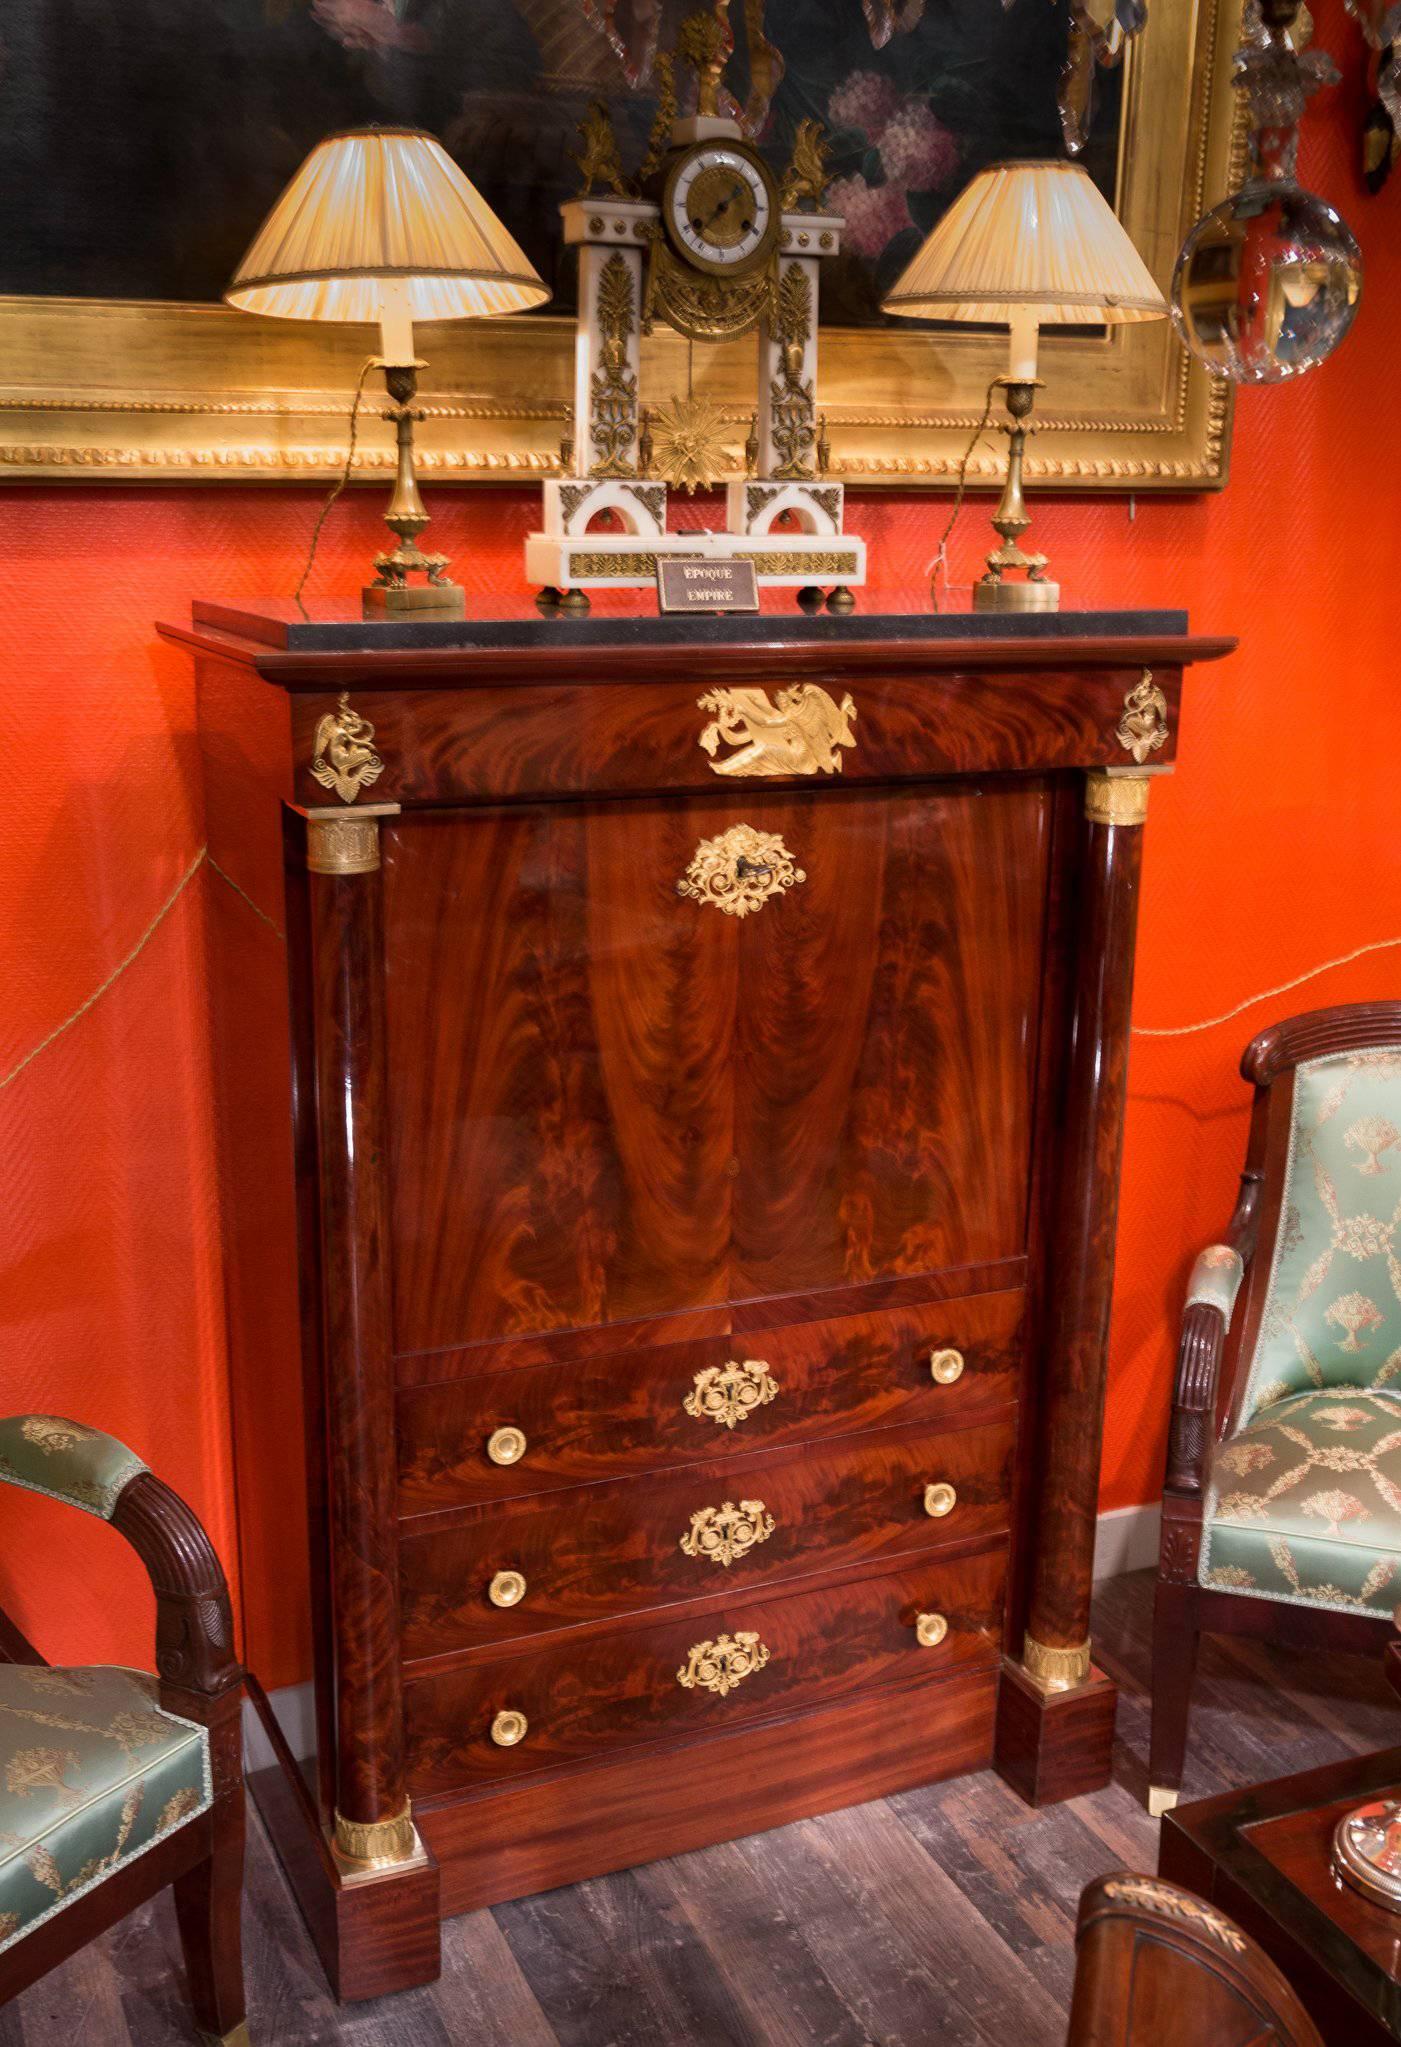 Early 19th century, French First Empire period, attributed to Jacob Freres Rue Meslée, flame mahogany, and gilt bronze-mounted “secretaire a abattant” with French polish retaining its original dark gray Belgium black marble top.

Decorated